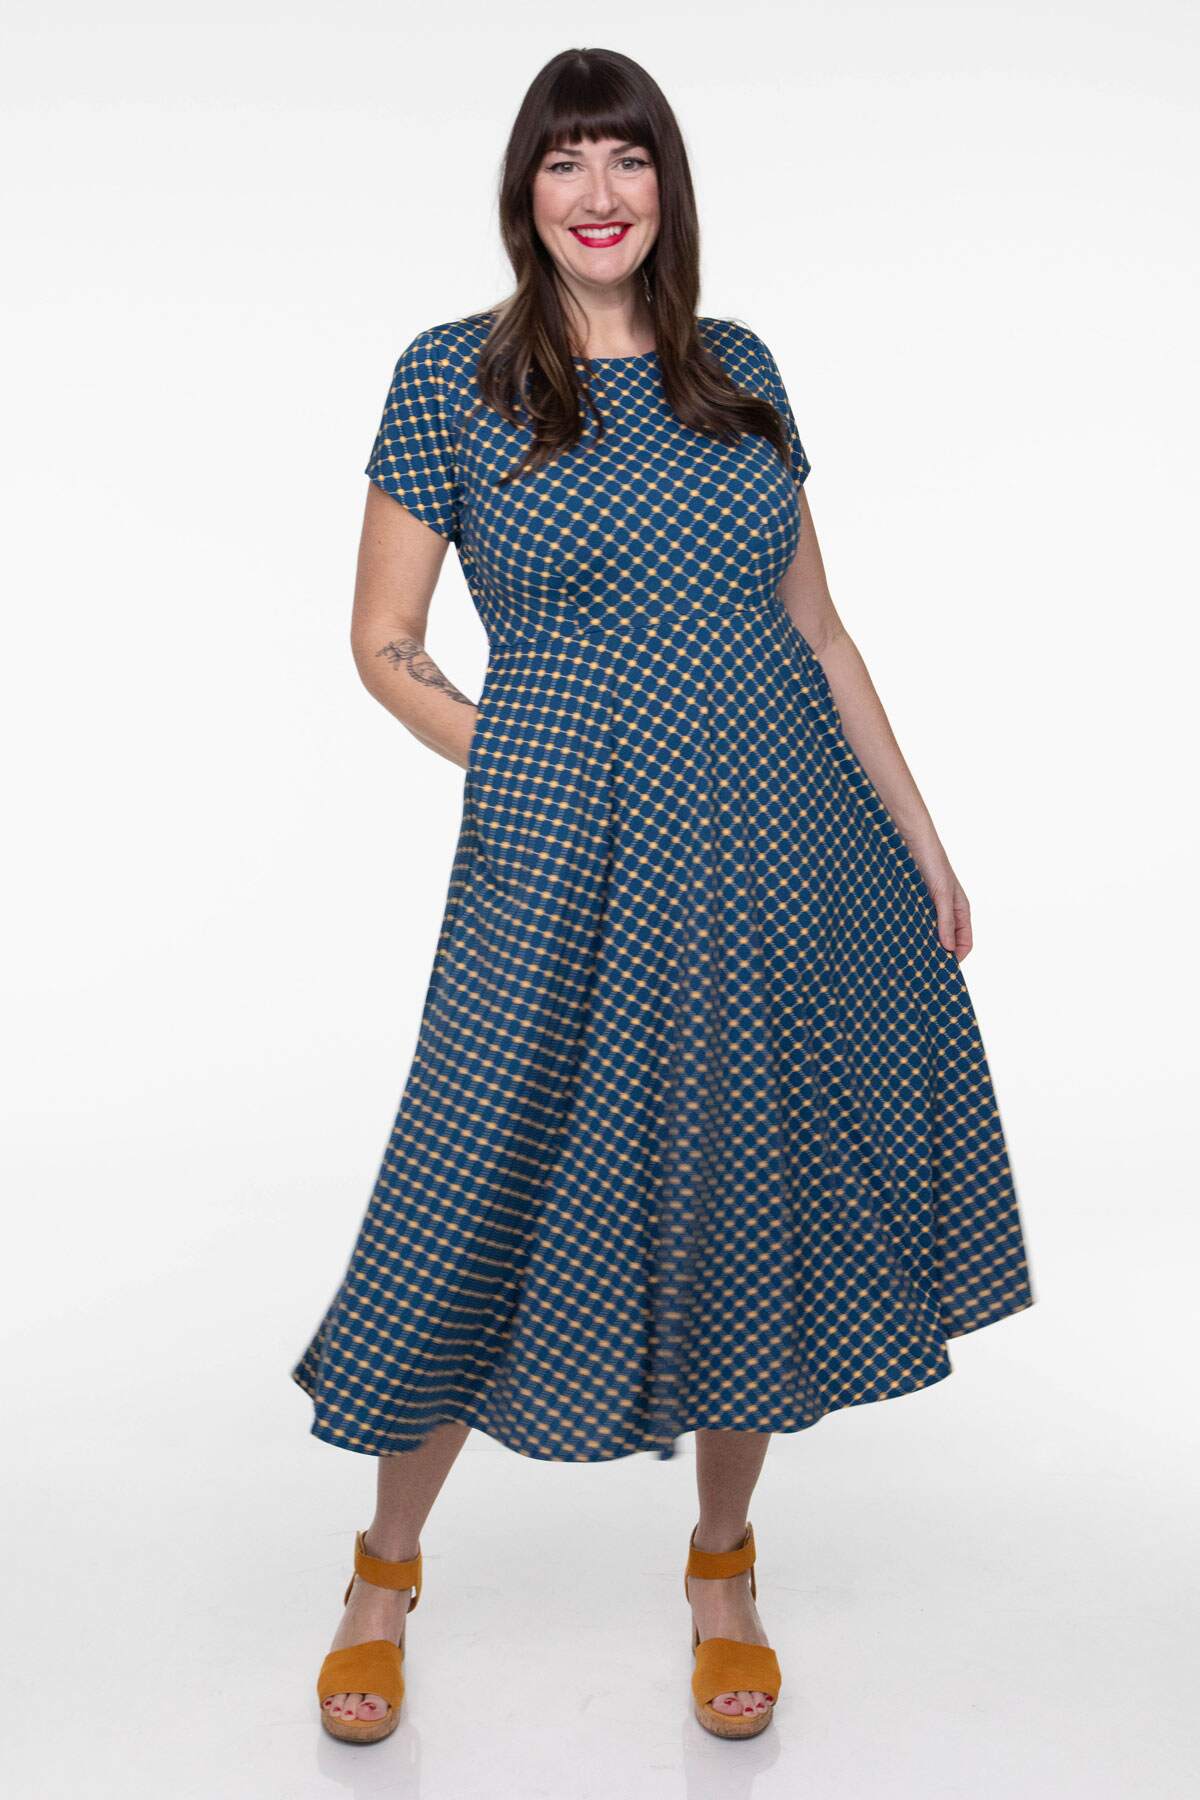 Katherine Dress in Navy and Gold Cross Dots by Karina Dresses